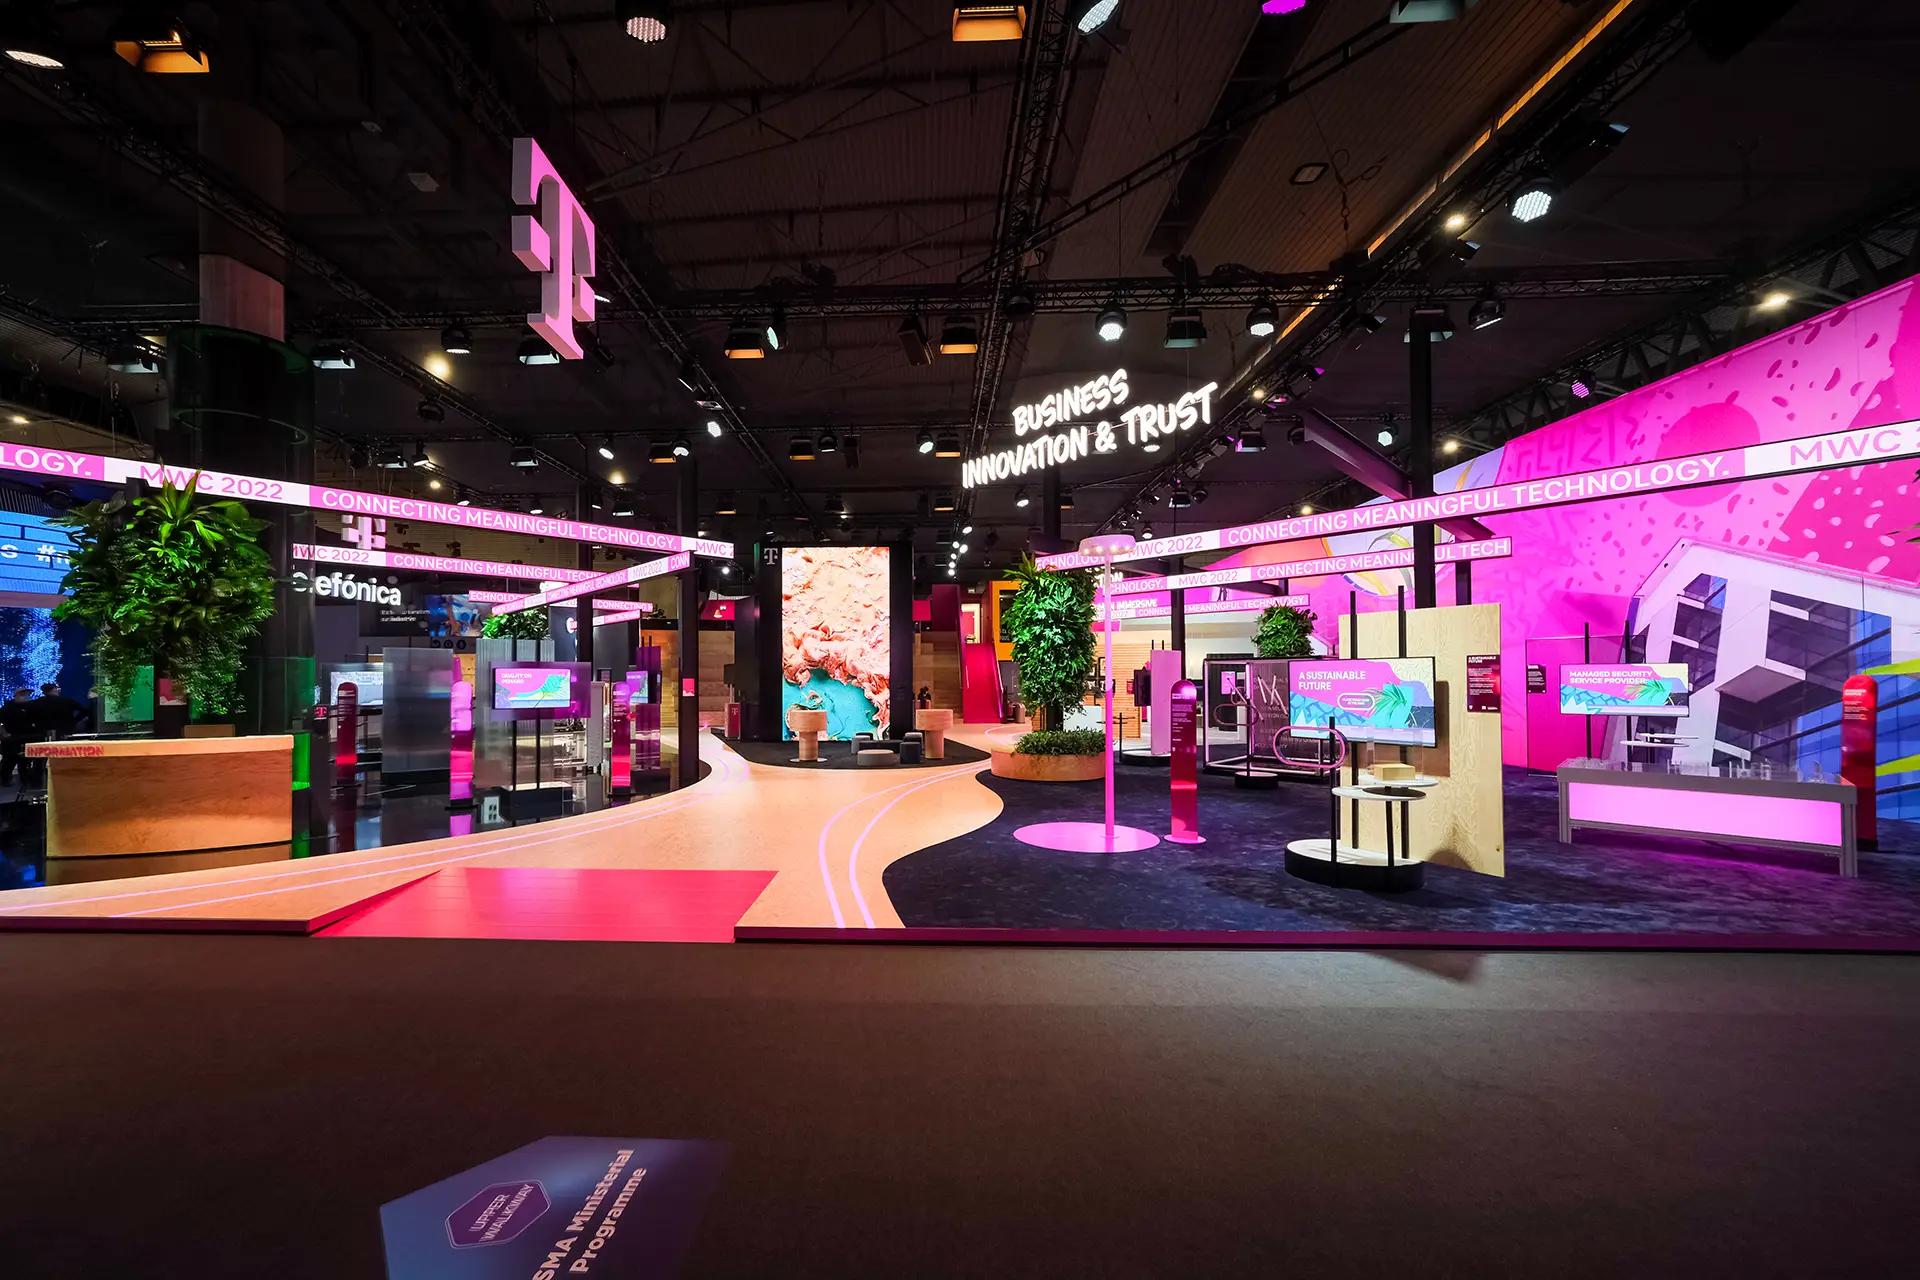 Deutsche Telekom at MWC 2022 – Leading Digital Telco, booth entrance